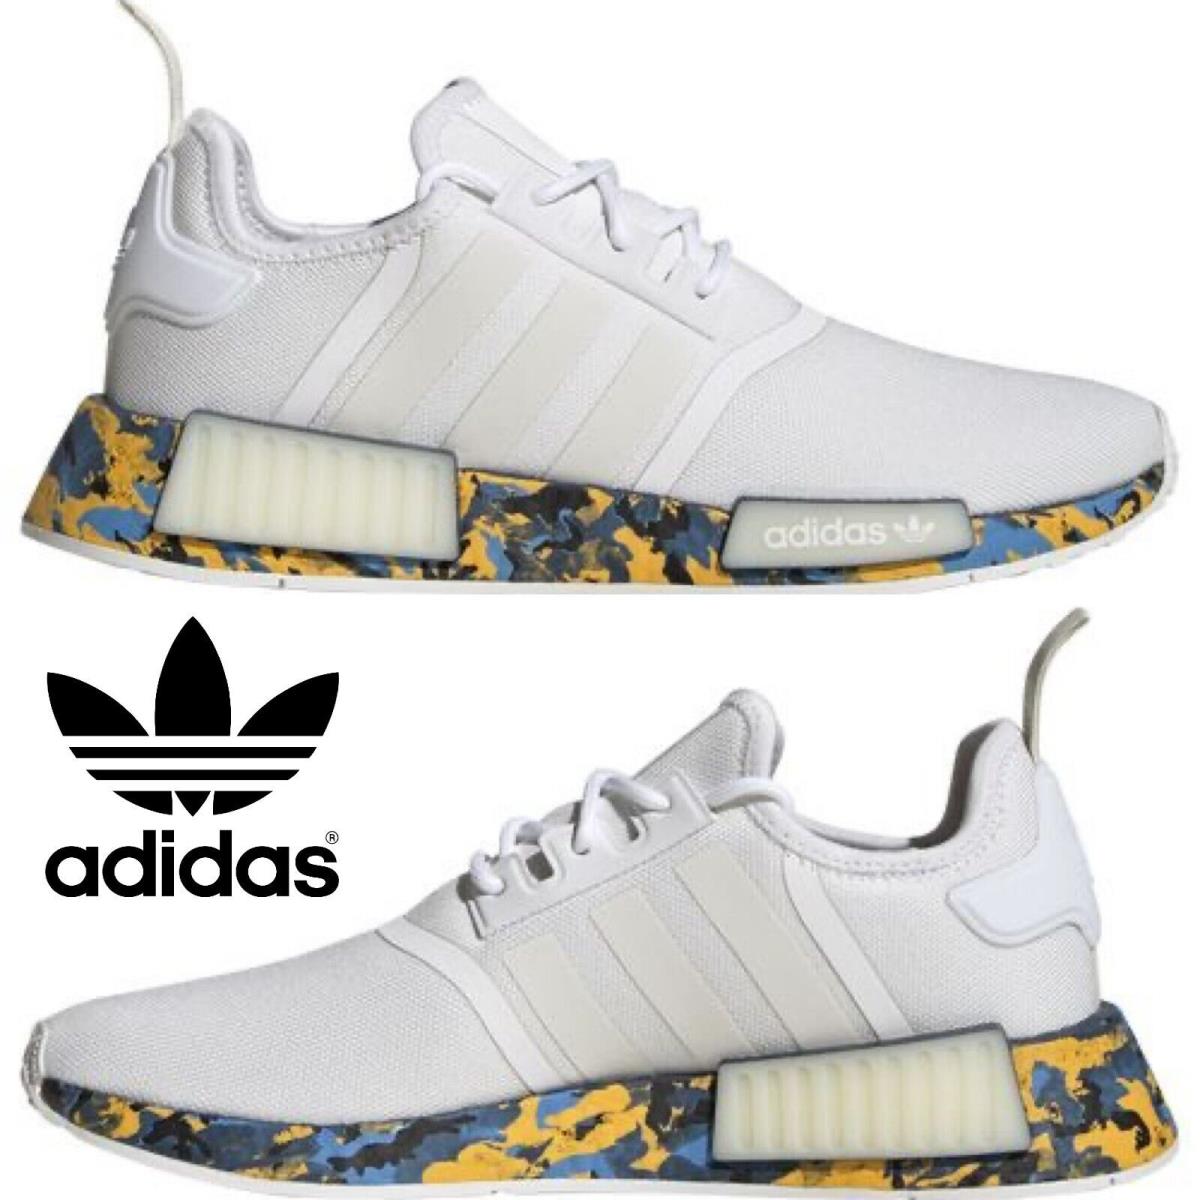 Adidas Originals Nmd R1 Men`s Sneakers Running Shoes Gym Casual Sport White Camo